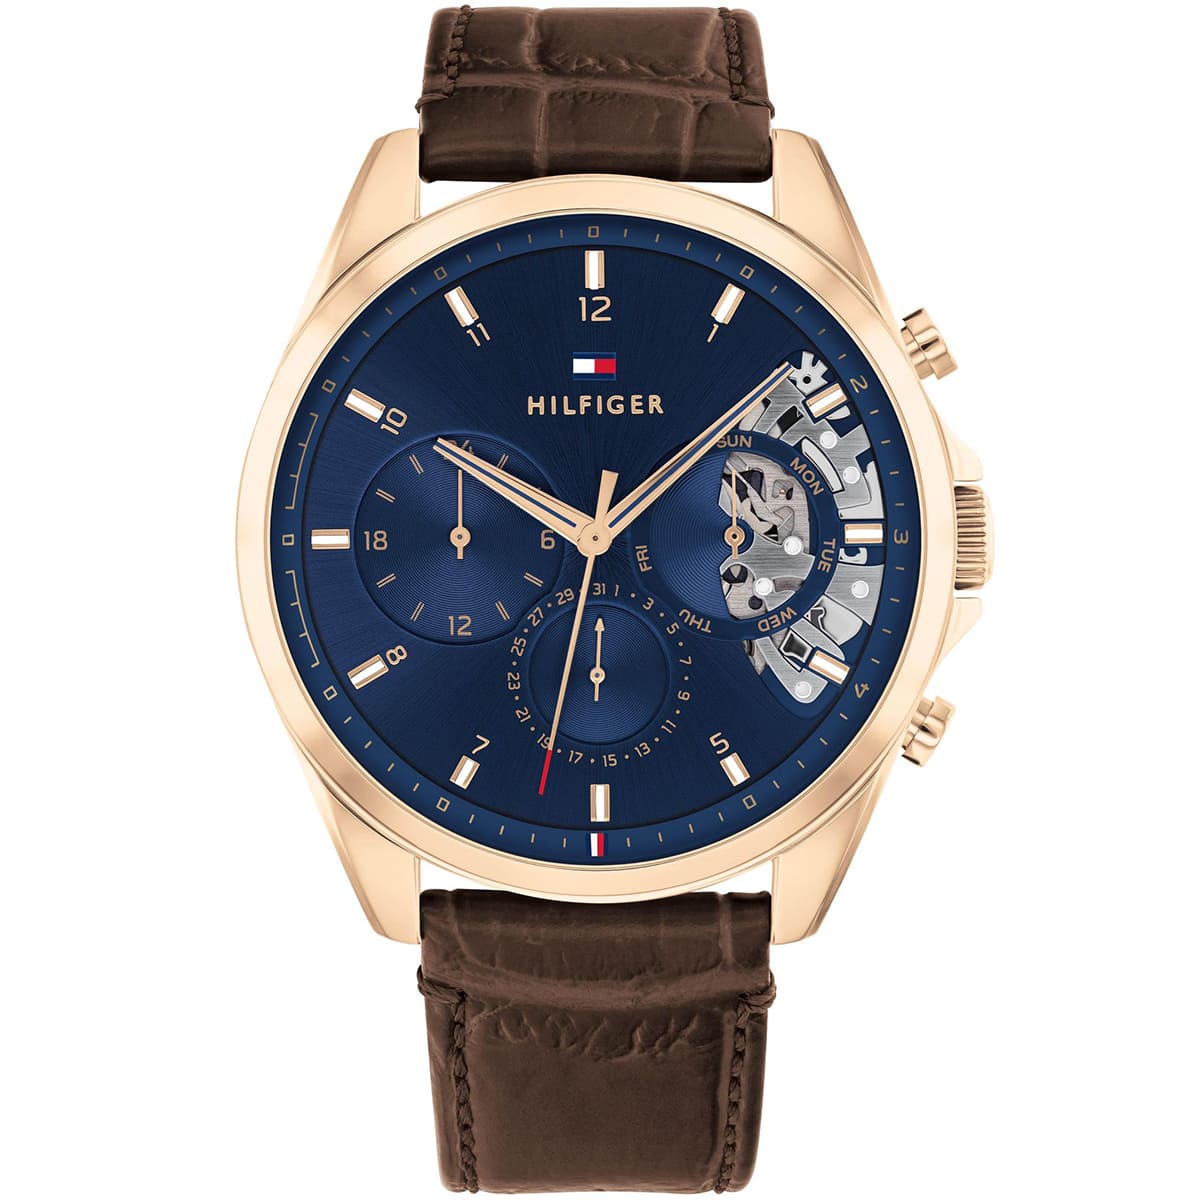 1710453-tommy-hilfiger-watch-men-blue-dial-leather-brown-strap-quartz-battery-analog-monthly-weekly-date-baker